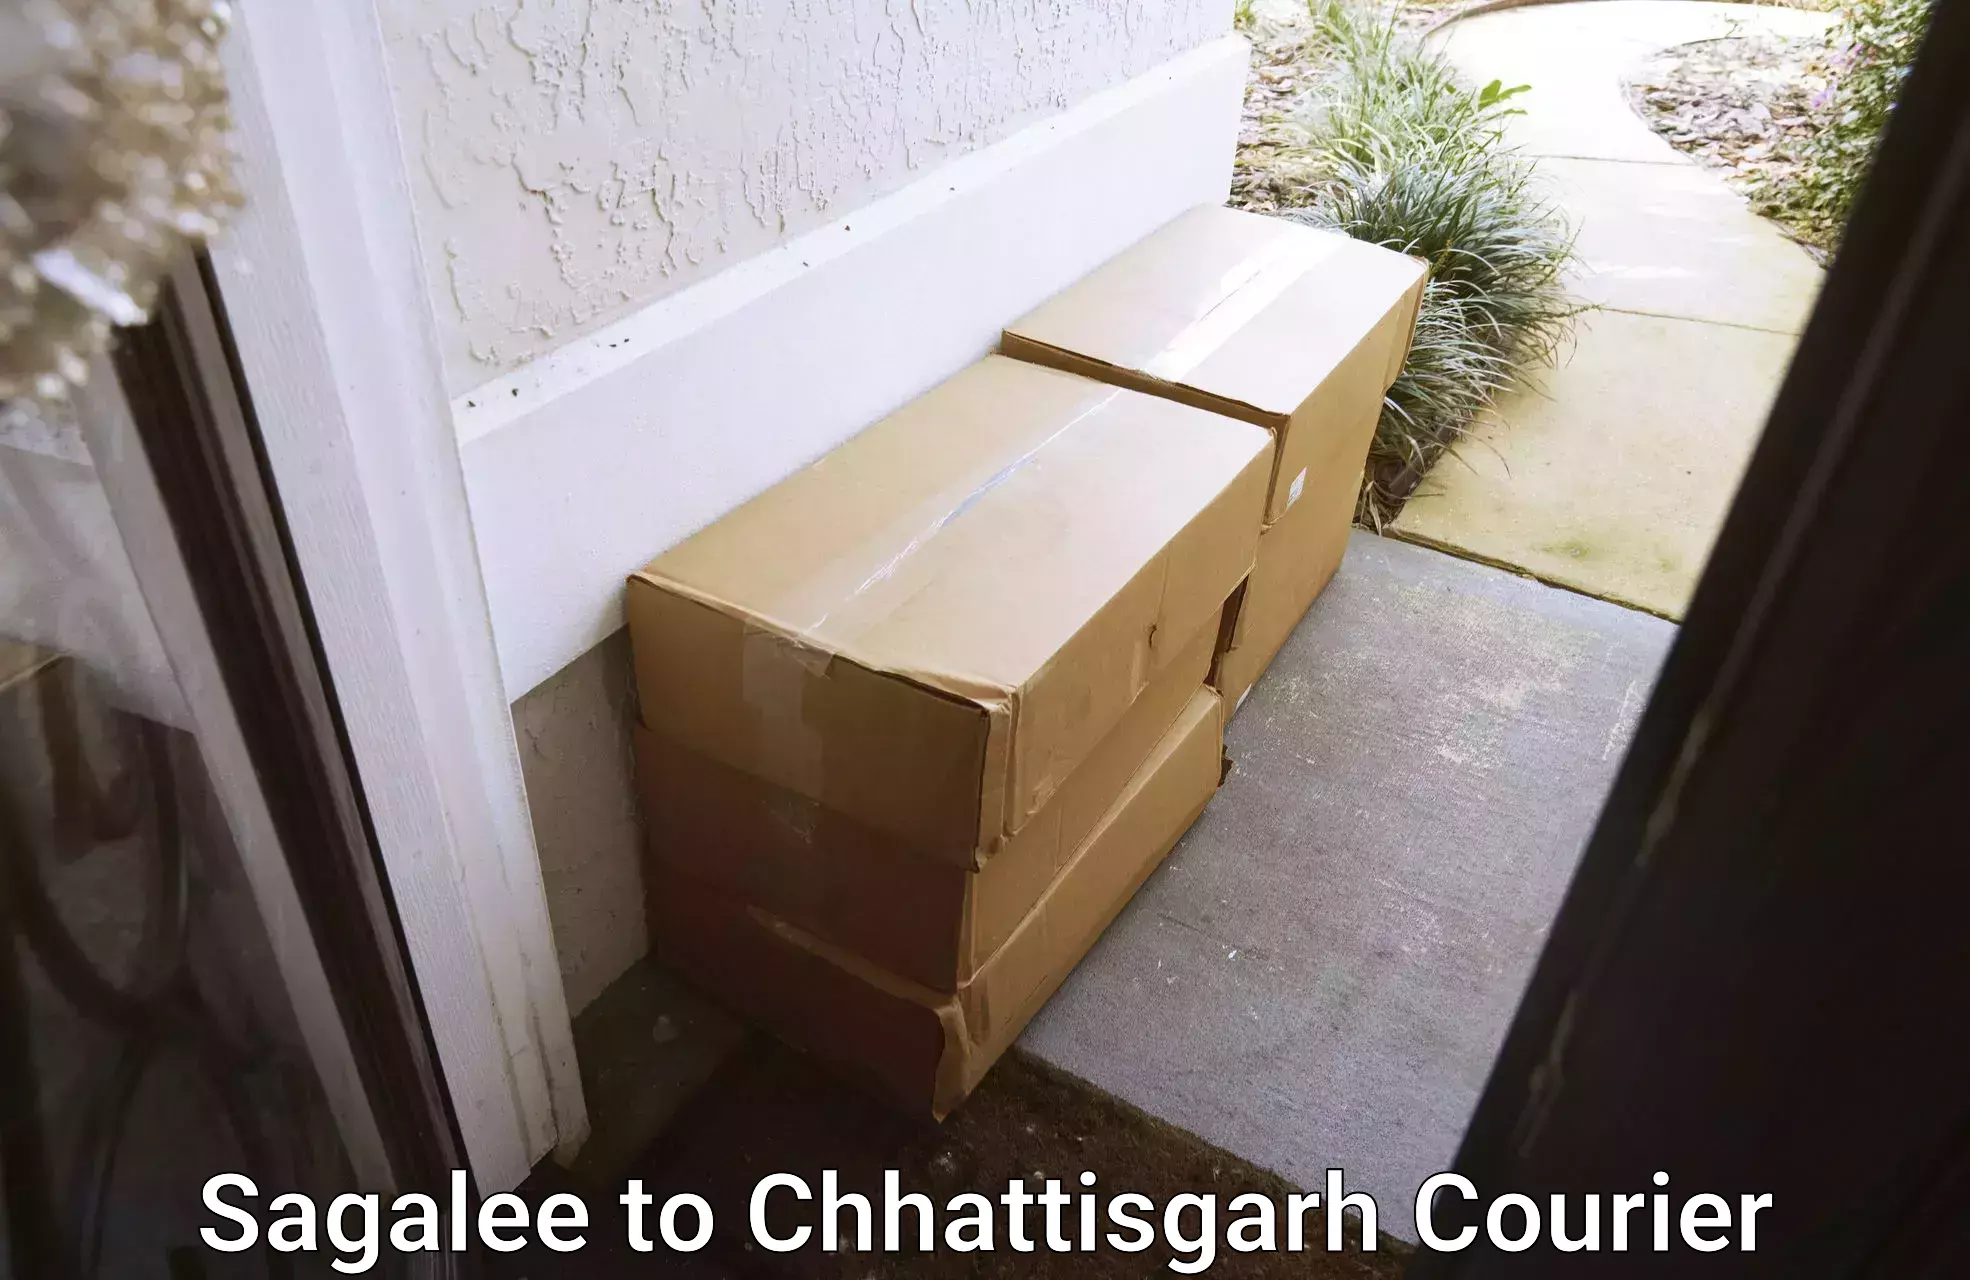 Reliable parcel services in Sagalee to Raigarh